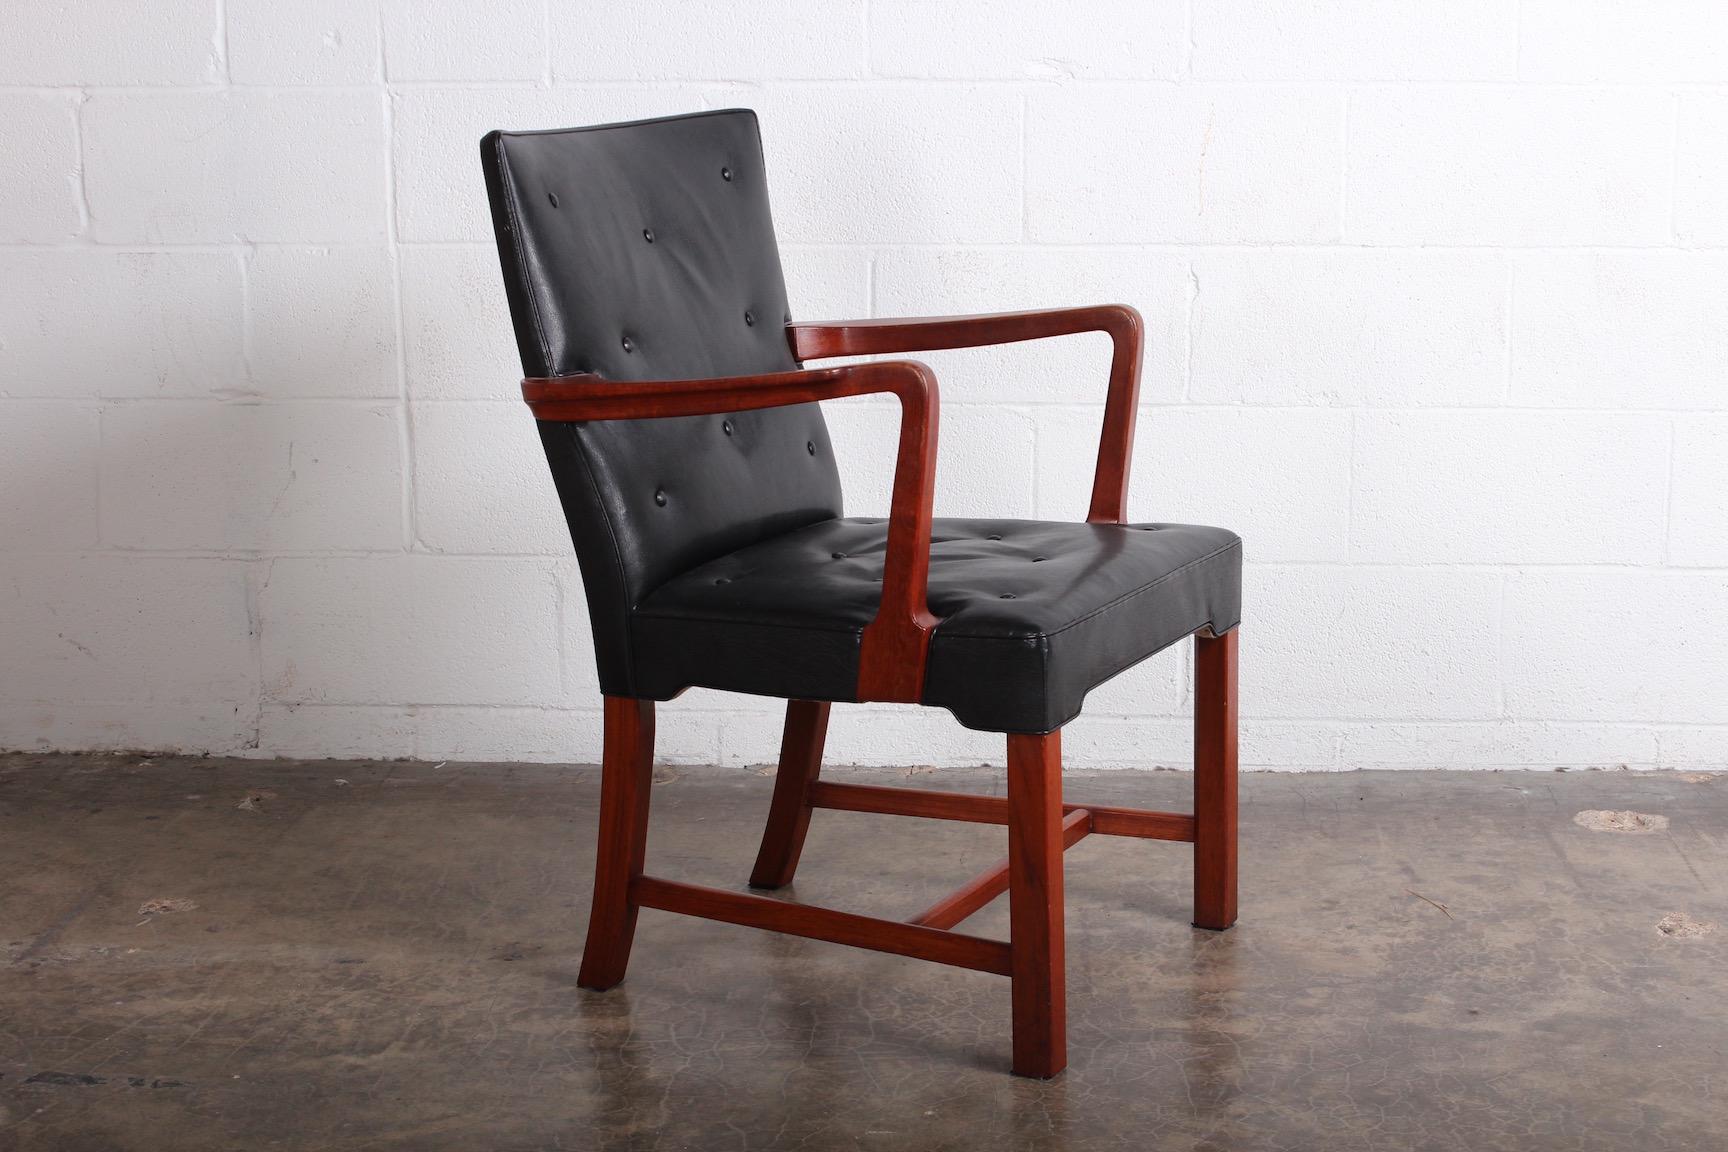 A teak and leather armchair or desk chair by Jacob Kjær.